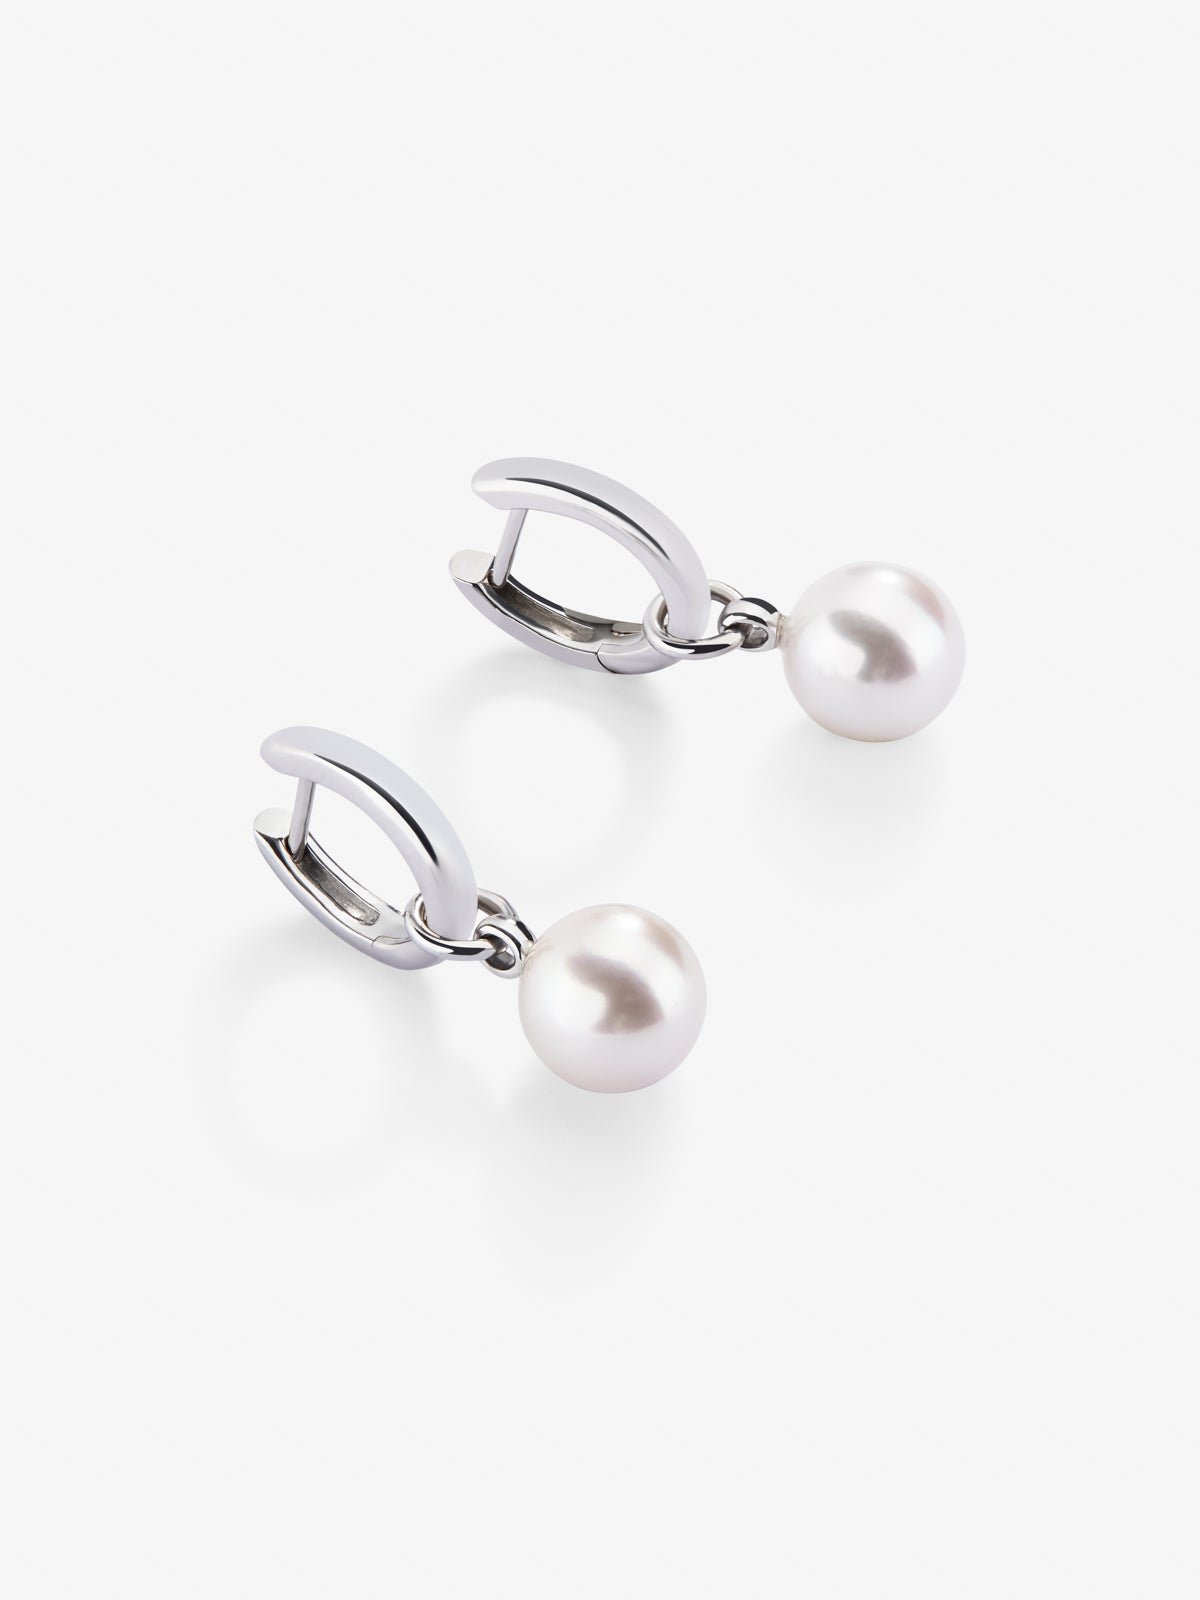 925 silver earrings with 8.5 mm Akoya pearls